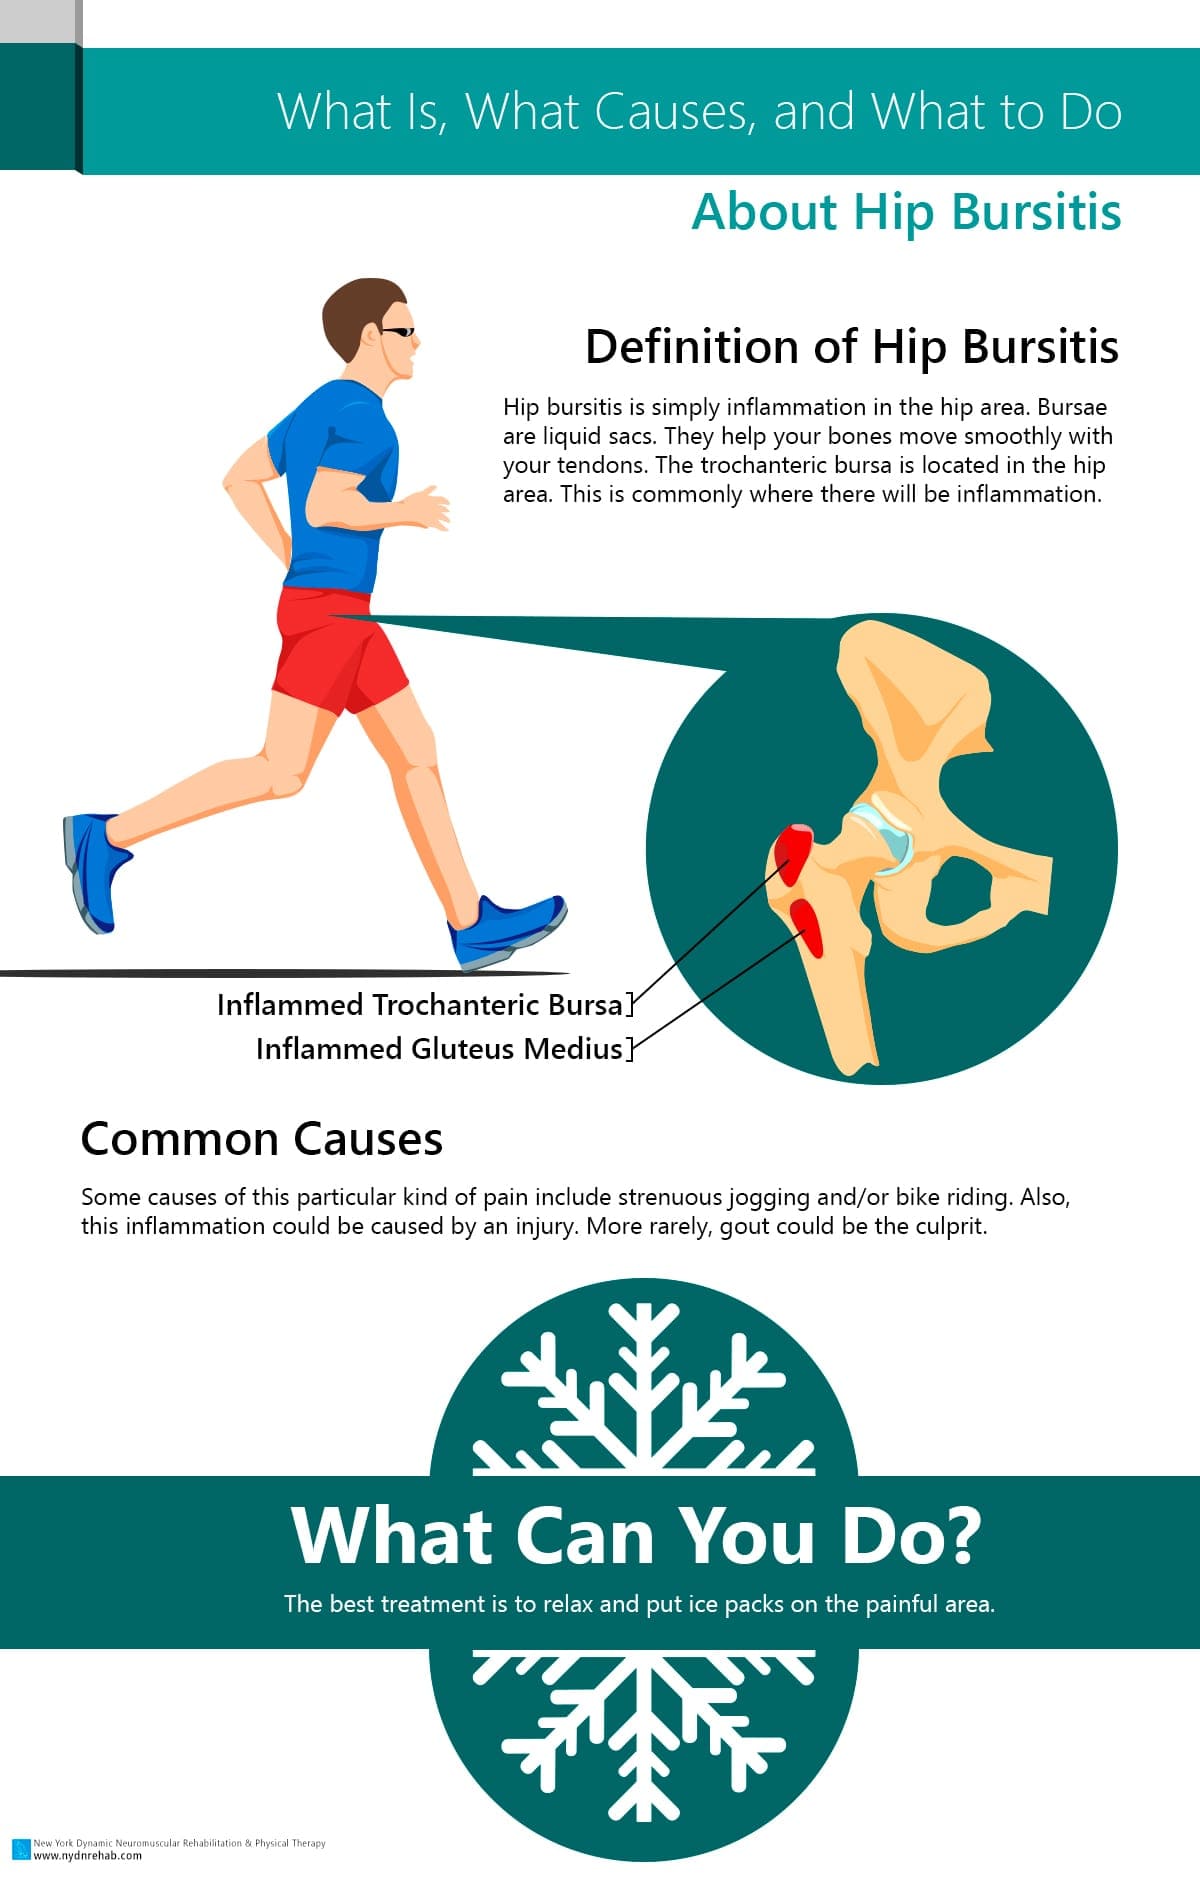 What Is, What Causes, and What to Do About Hip Bursitis